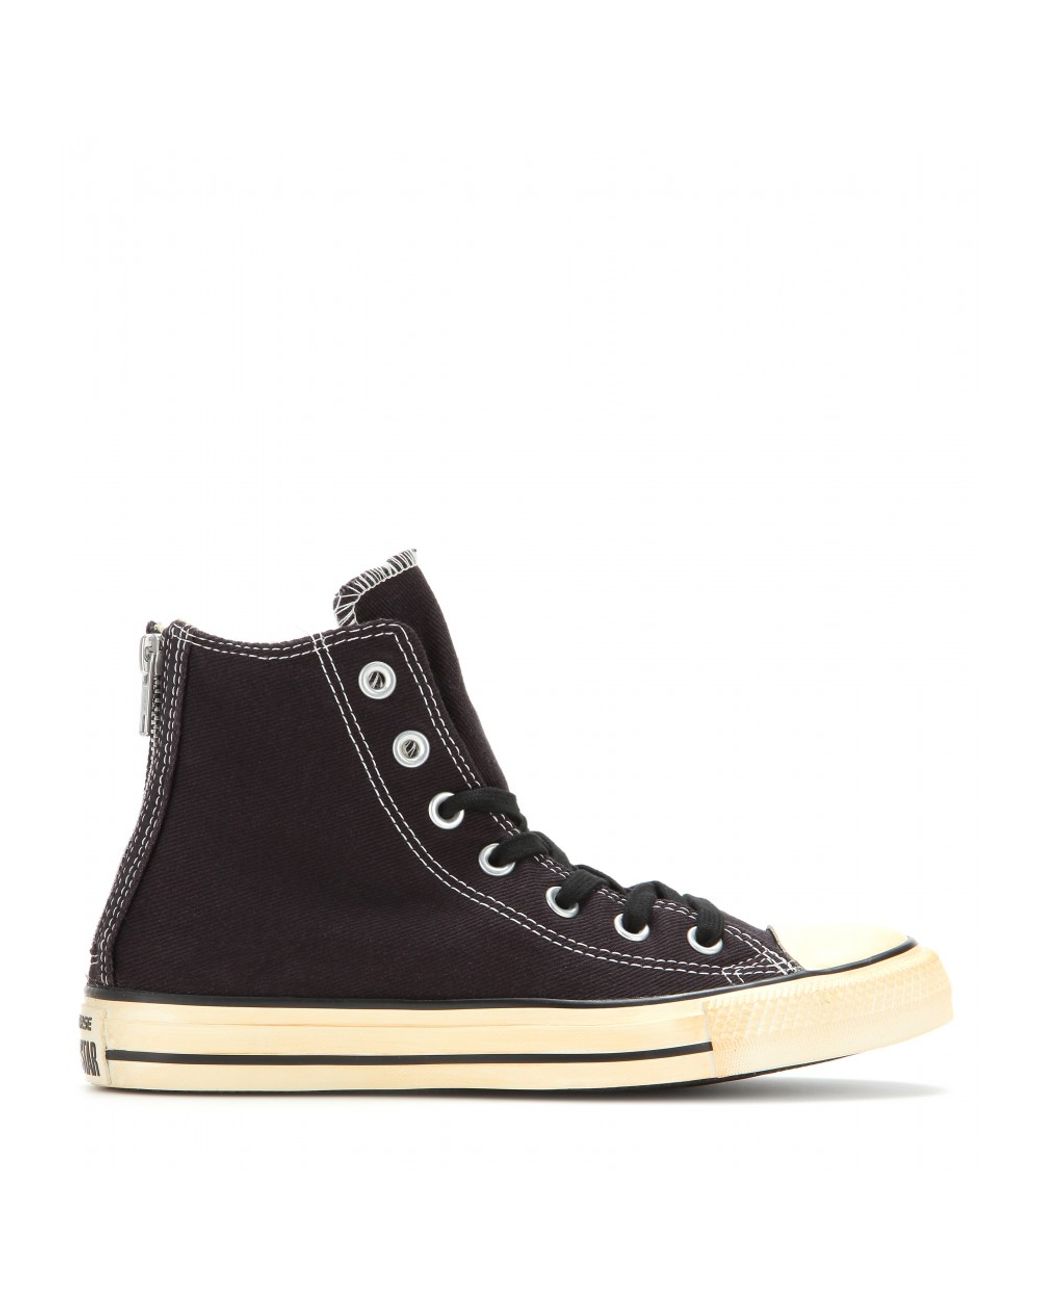 Converse Chuck Taylor Back Zip High-Top Sneakers in Black | Lyst